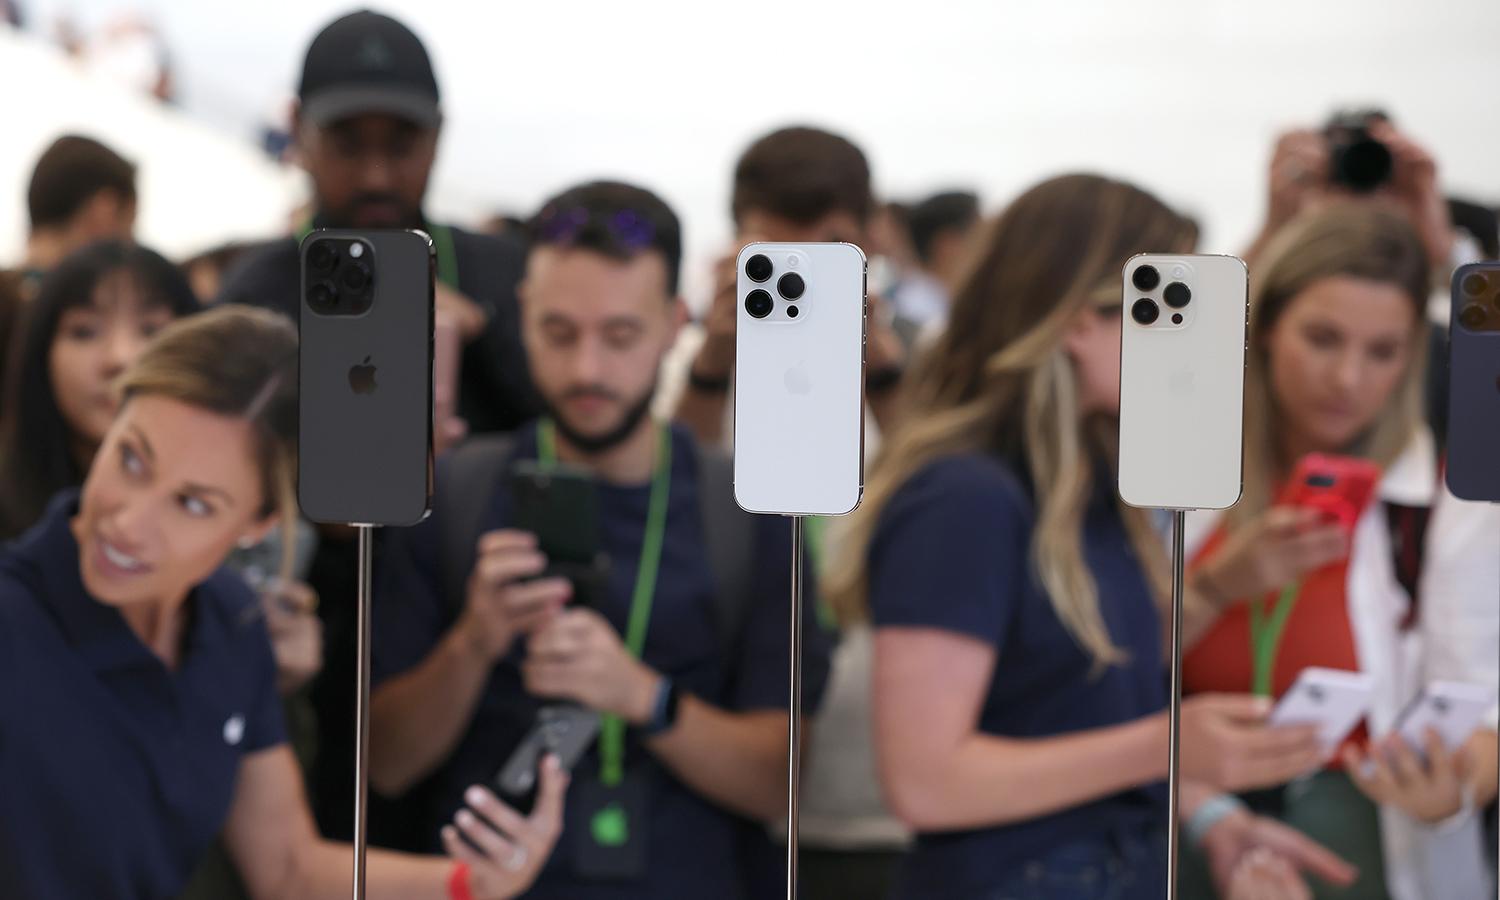 New iPhone 14 Pros are displayed on stands at an event